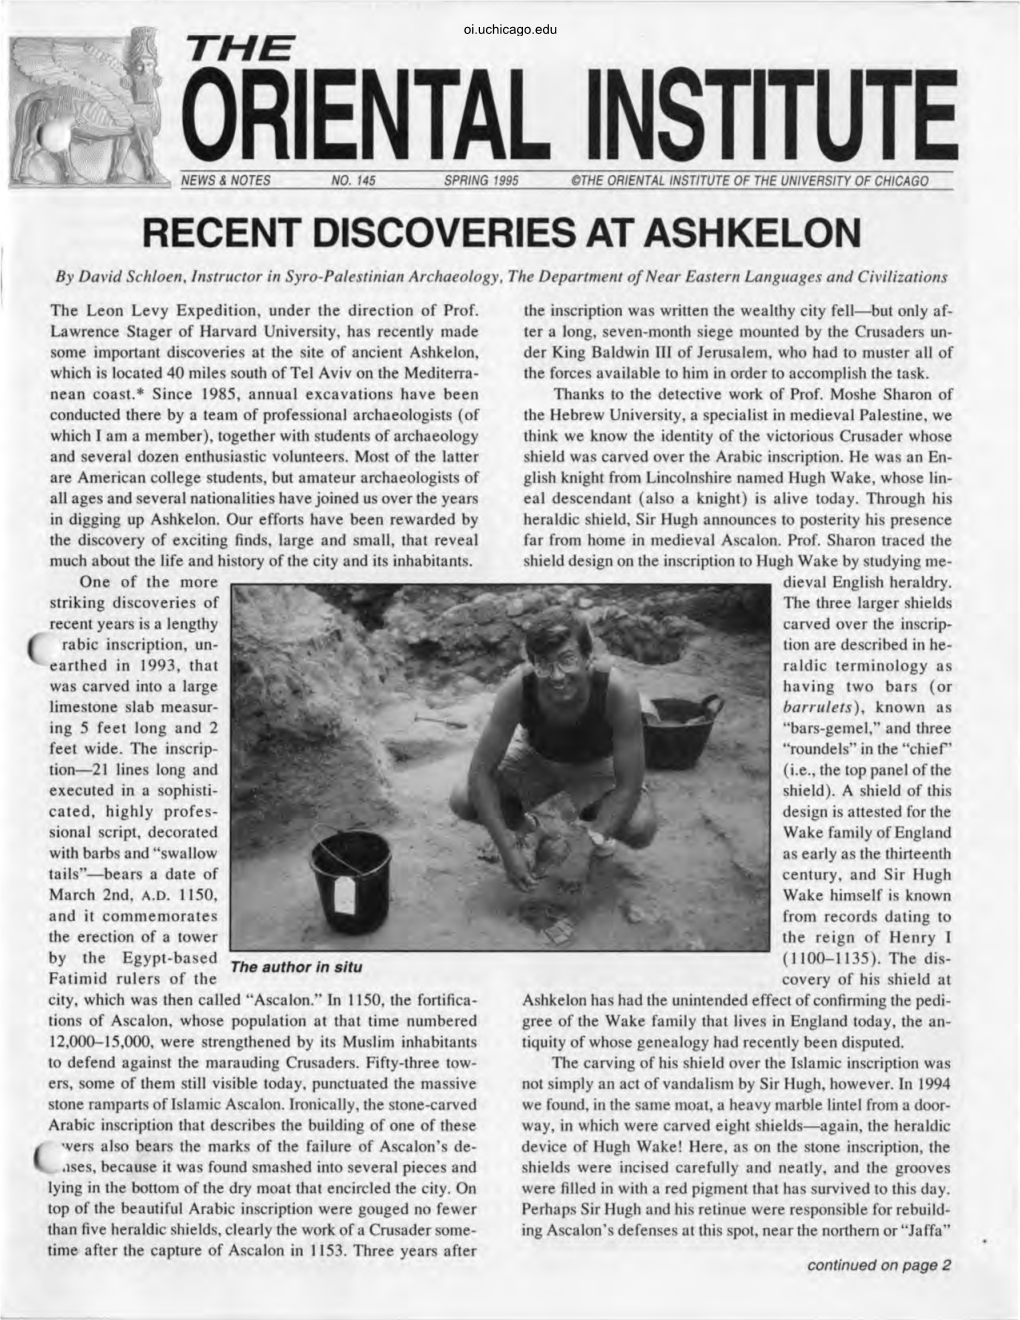 ASHKELON by David Schloen, Instructor in Syro-Palestinian Archaeology, the Department of Near Eastern Languages and Civilizations